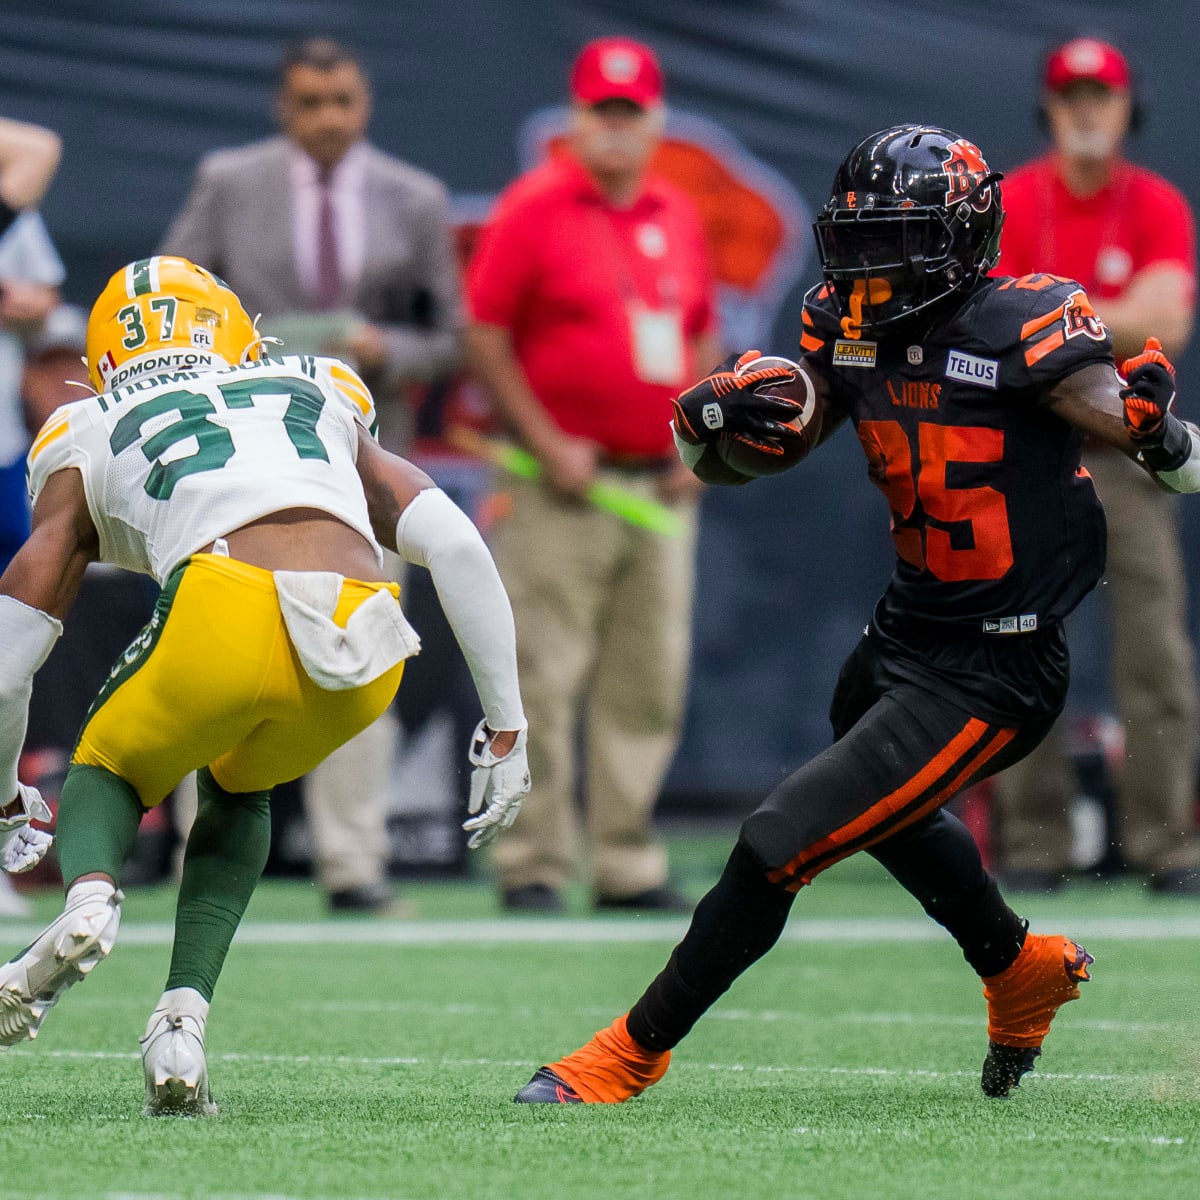 BC Lions at Winnipeg Blue Bombers Free Live Stream CFL Online - How to Watch and Stream Major League and College Sports